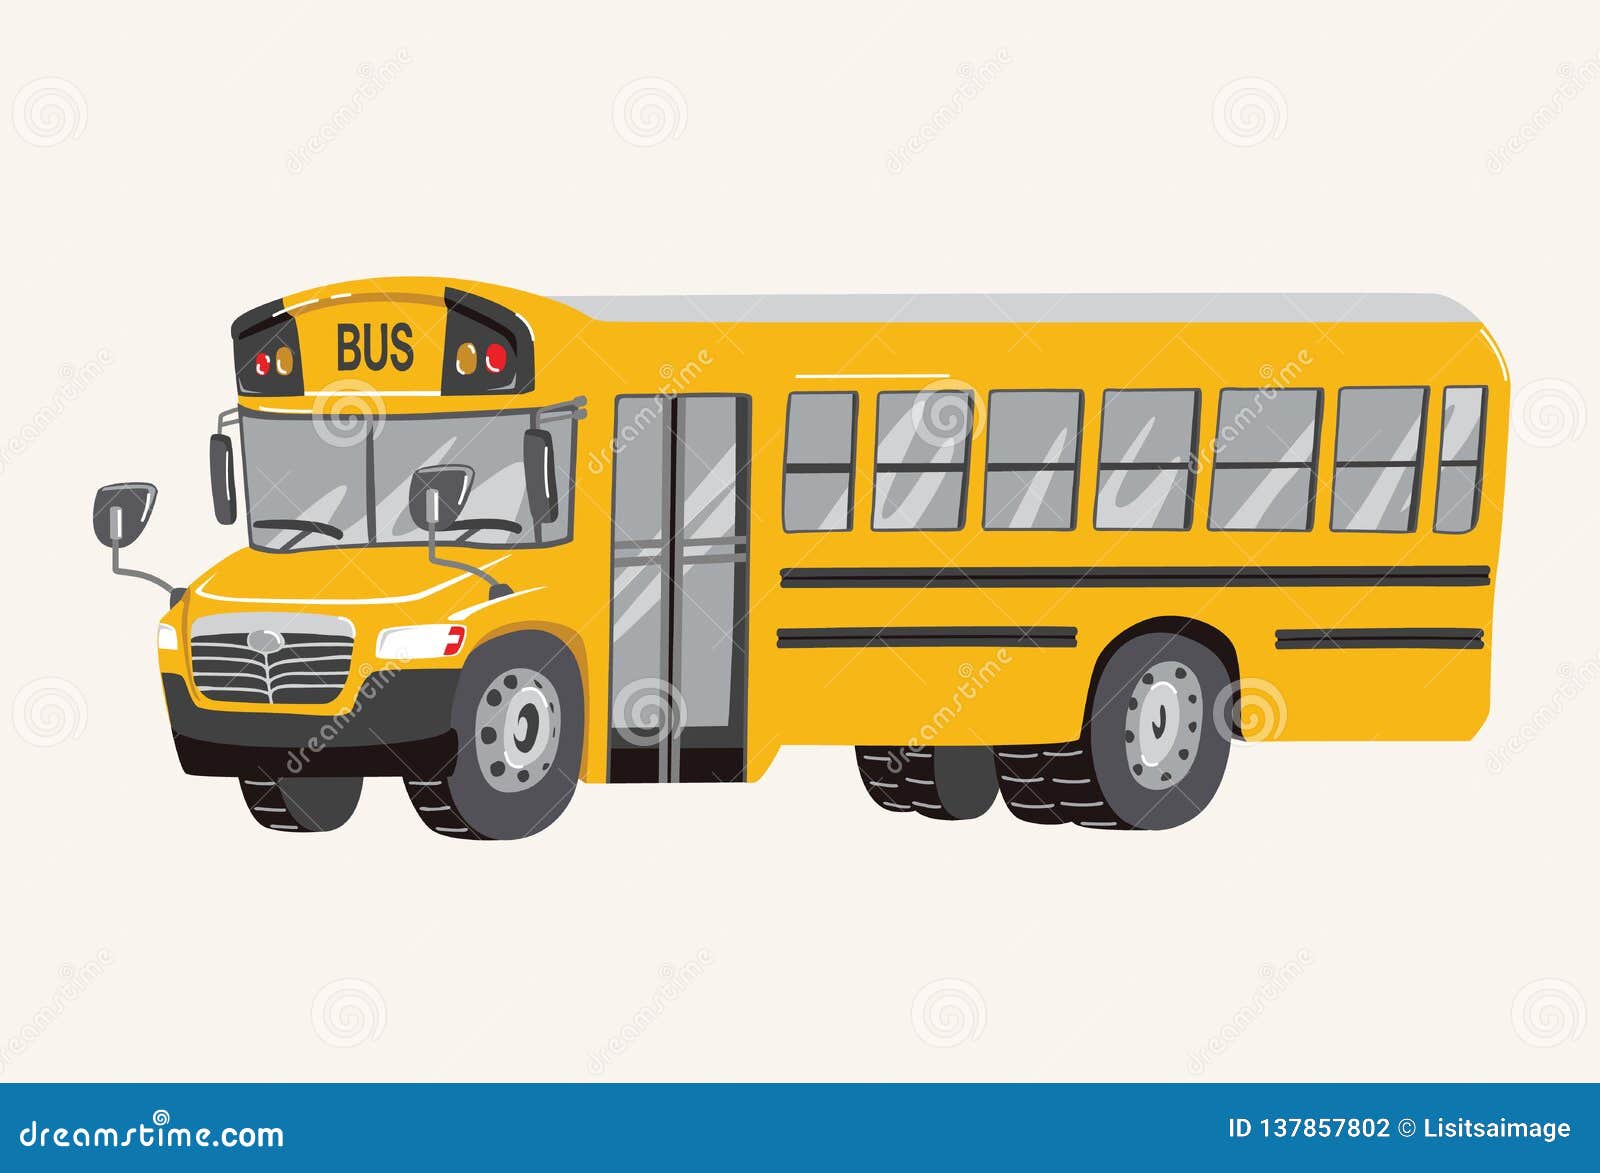 Funny Cute Hand Drawn Cartoon School Bus Illustration. Toy Yellow School Bus.  Toy Vehicles for Boys. Vector Illustration Stock Vector - Illustration of  automobile, design: 137857802